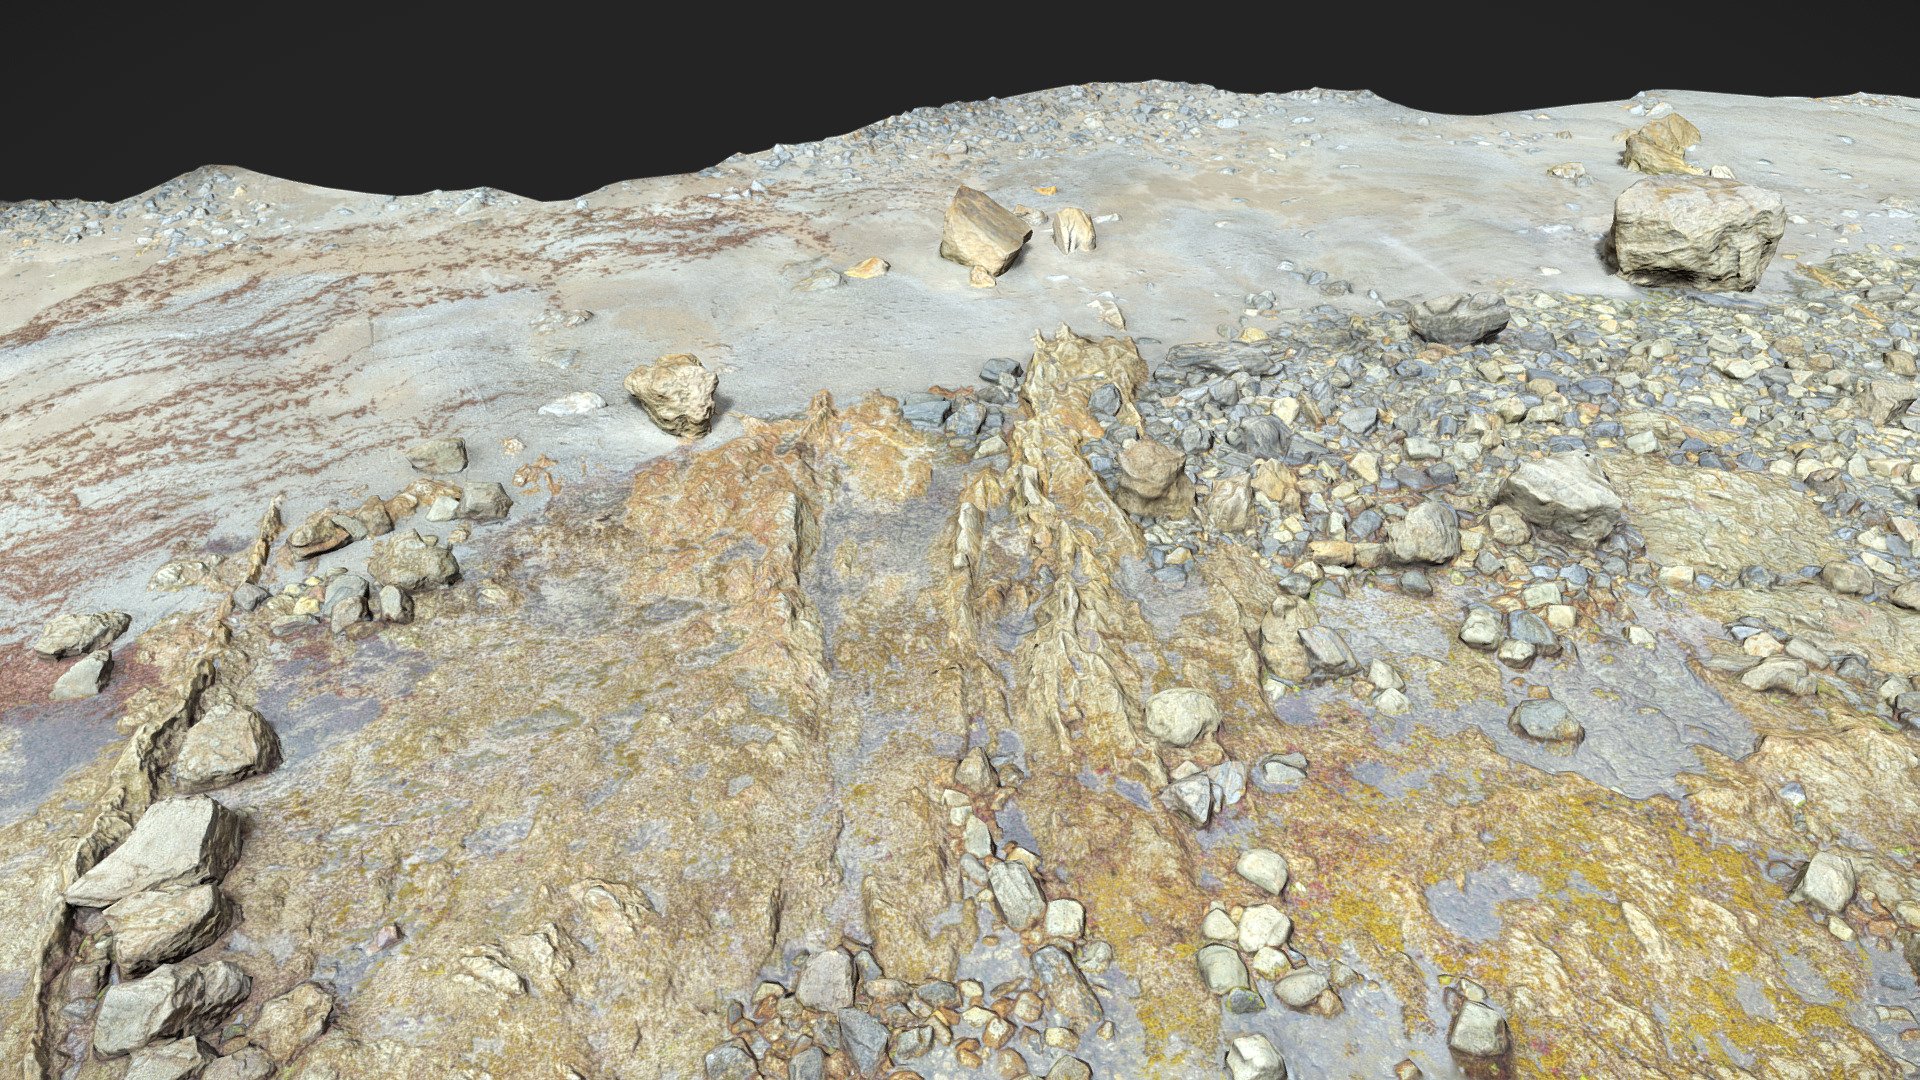 Captured in neutral lighting conditions. Feel free to rotate the lights.

Big Coastal Beach Rock Stone Ground Scan with up to 16K PBR textures: 




Albedo

Normal

Roughness

Displacement

Ambient Occlusion

Rendered in Cycles with displacement + adaptive subdivions:


Additional Files contain:




blender source file + packed textures

.fbx

.obj

textures 16k

Please let me know if something is not working as it should 3d model